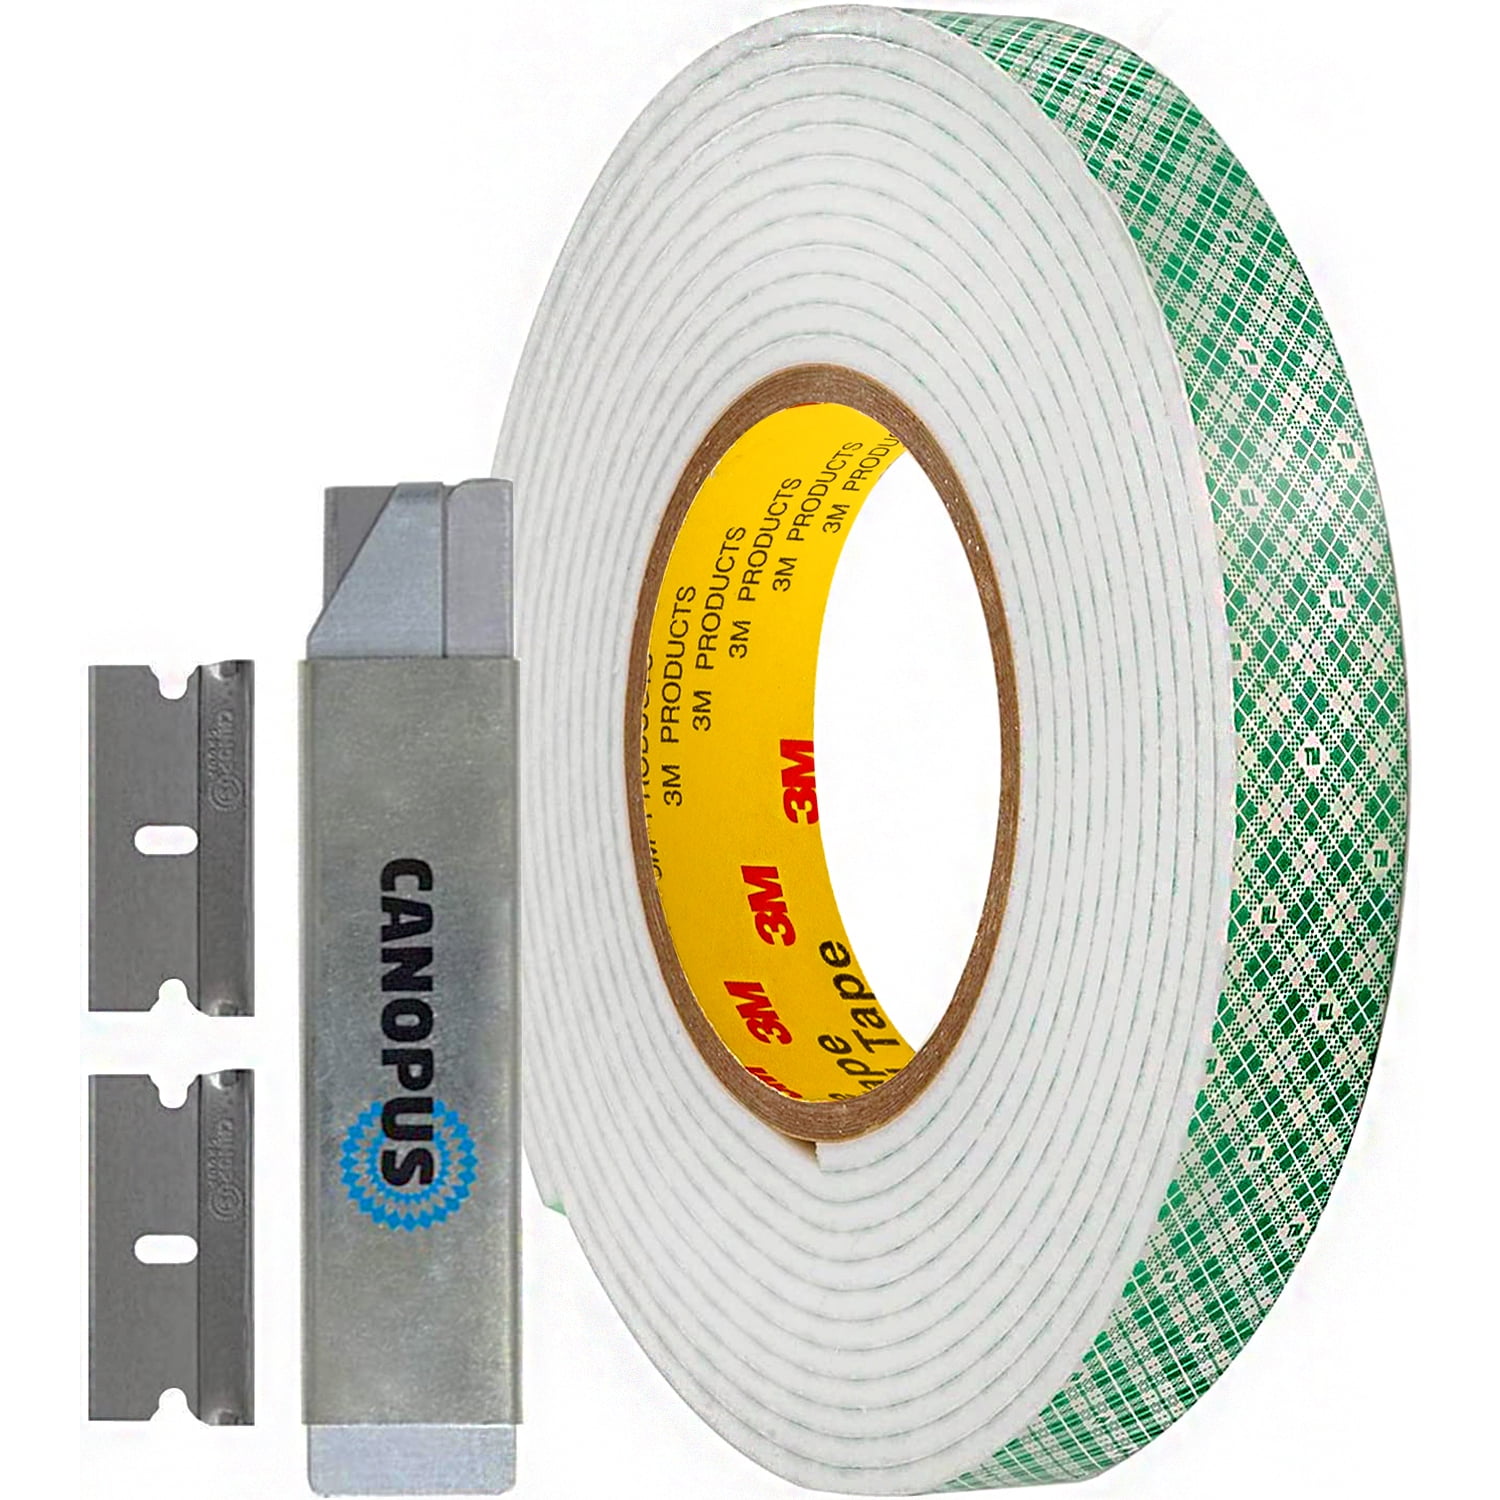 WENSSKKU Extra Strong Adhesive Double Sided Tape Heavy Duty,Super